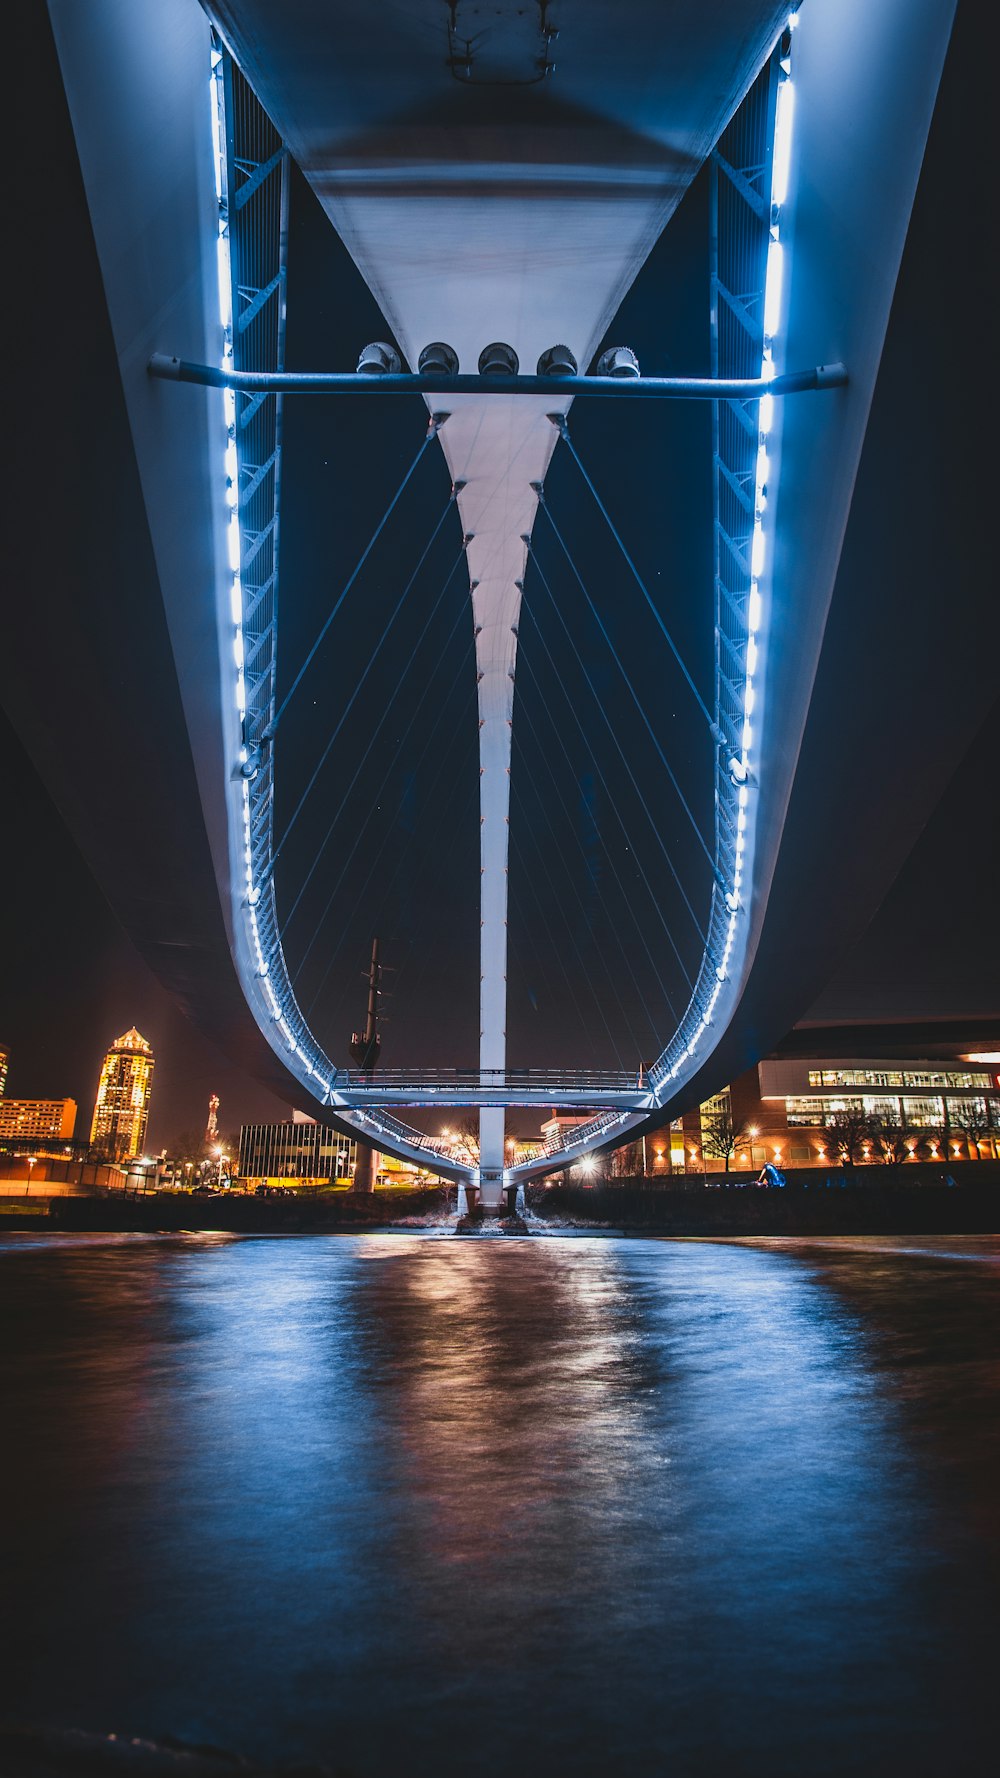 blue bridge over body of water during night time